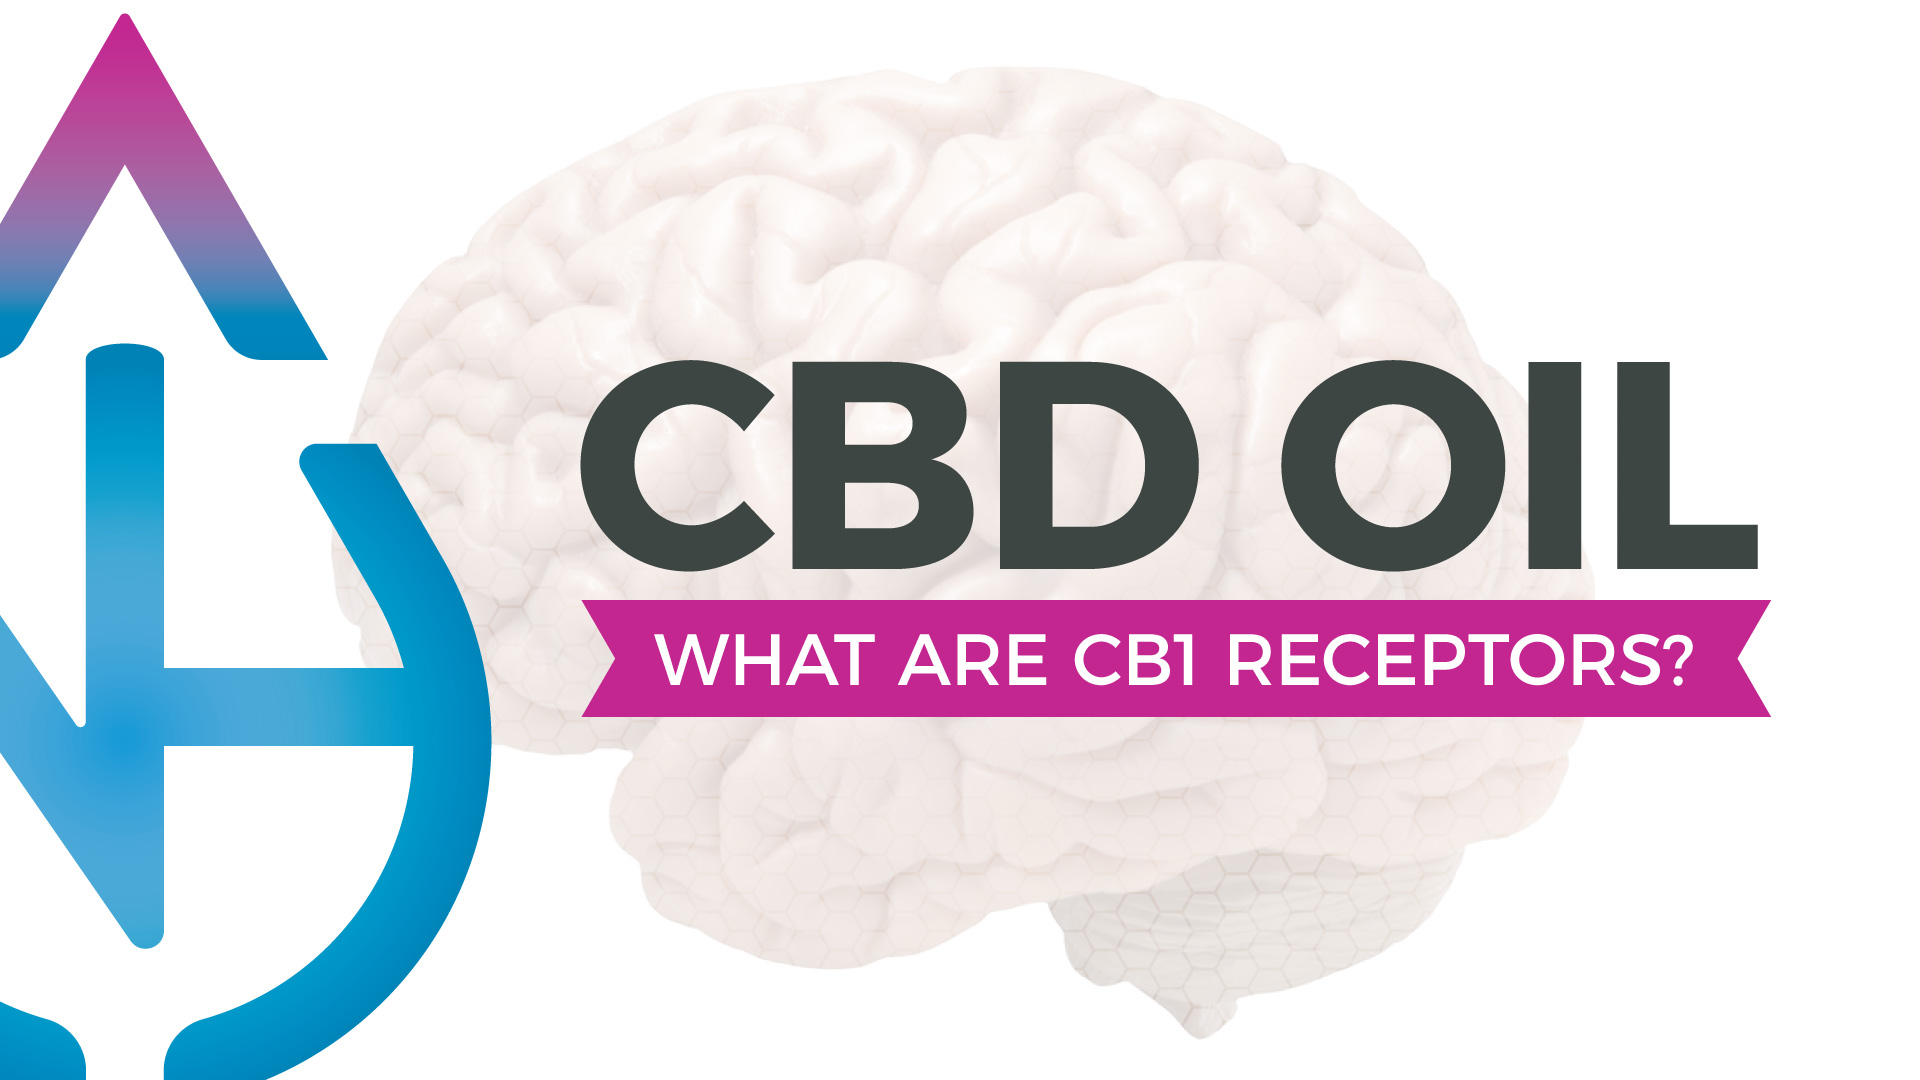 What Are CB1 Receptors?